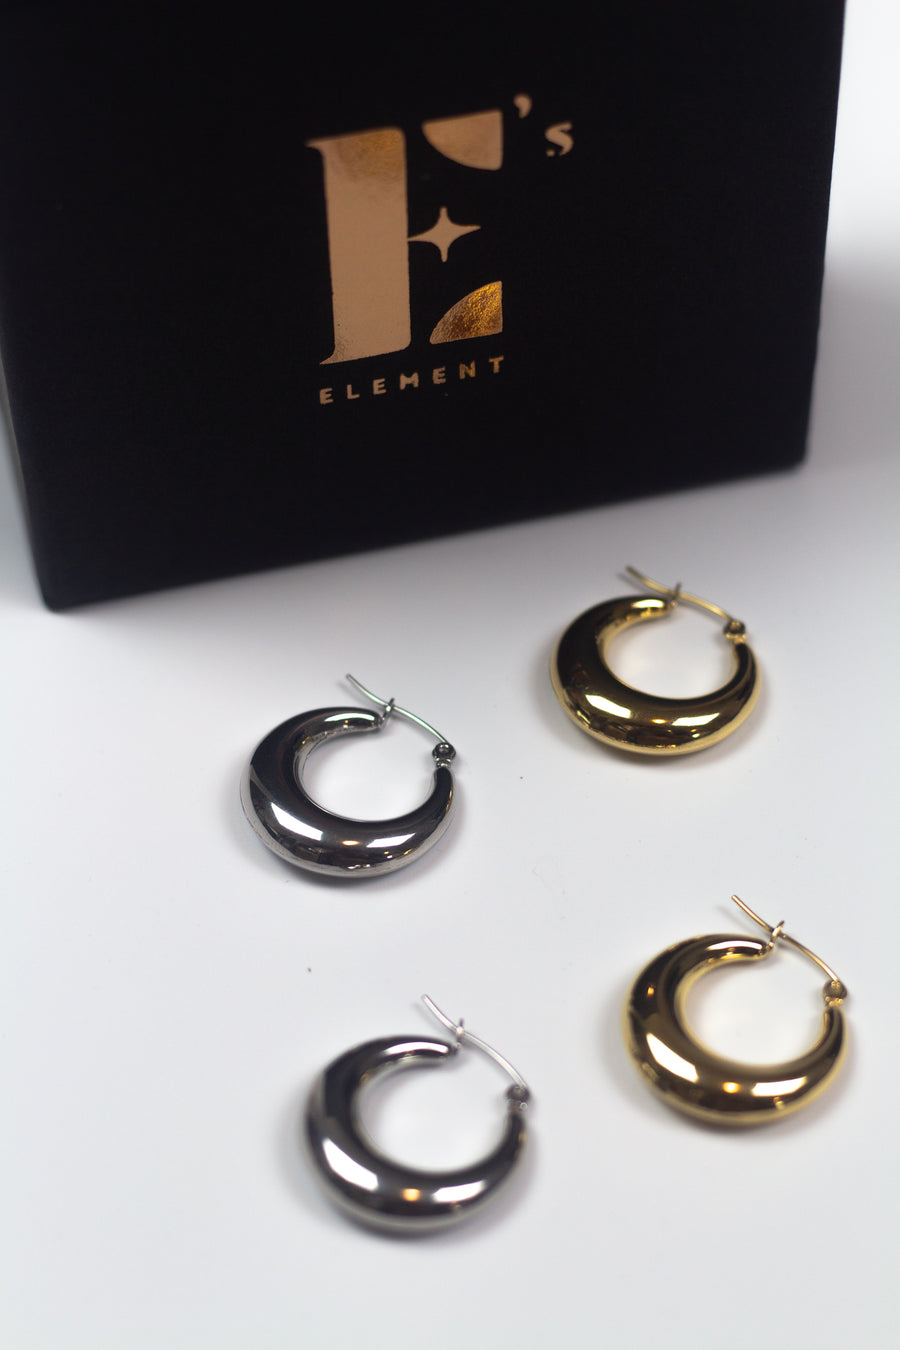 18k gold and silver stainless steel hoop earrings placed side-by-side. E's element container is above them. Alyssa Hoops by E's Element.